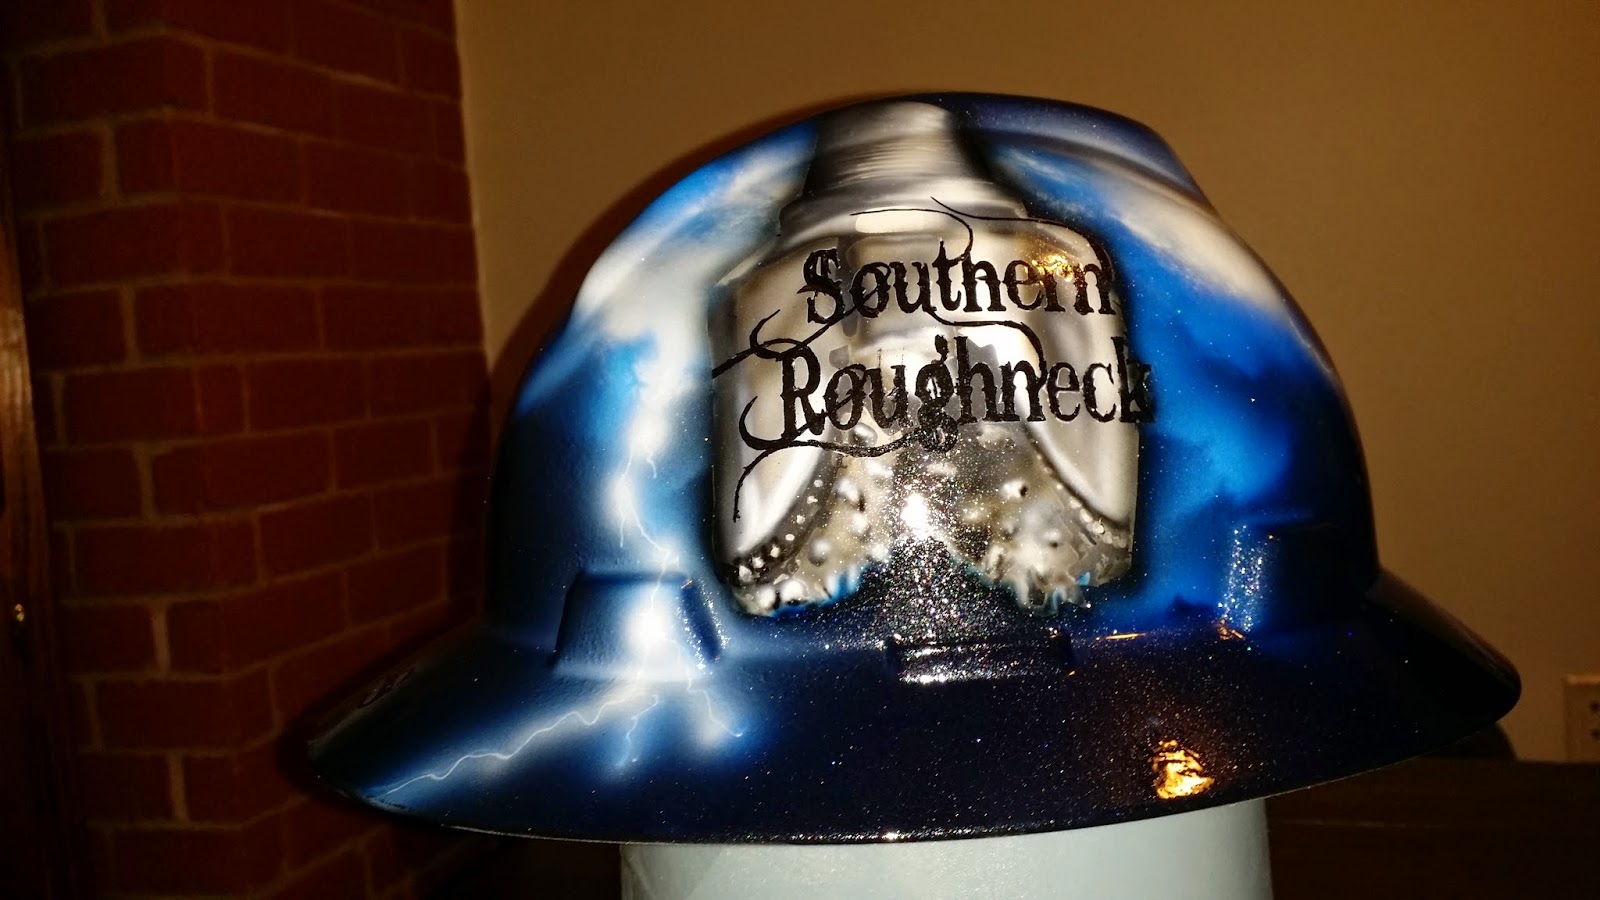 Zimmer DesignZ Custom Paint: Custom hard hat painted with Southern Roughneck Rebel theme1600 x 900